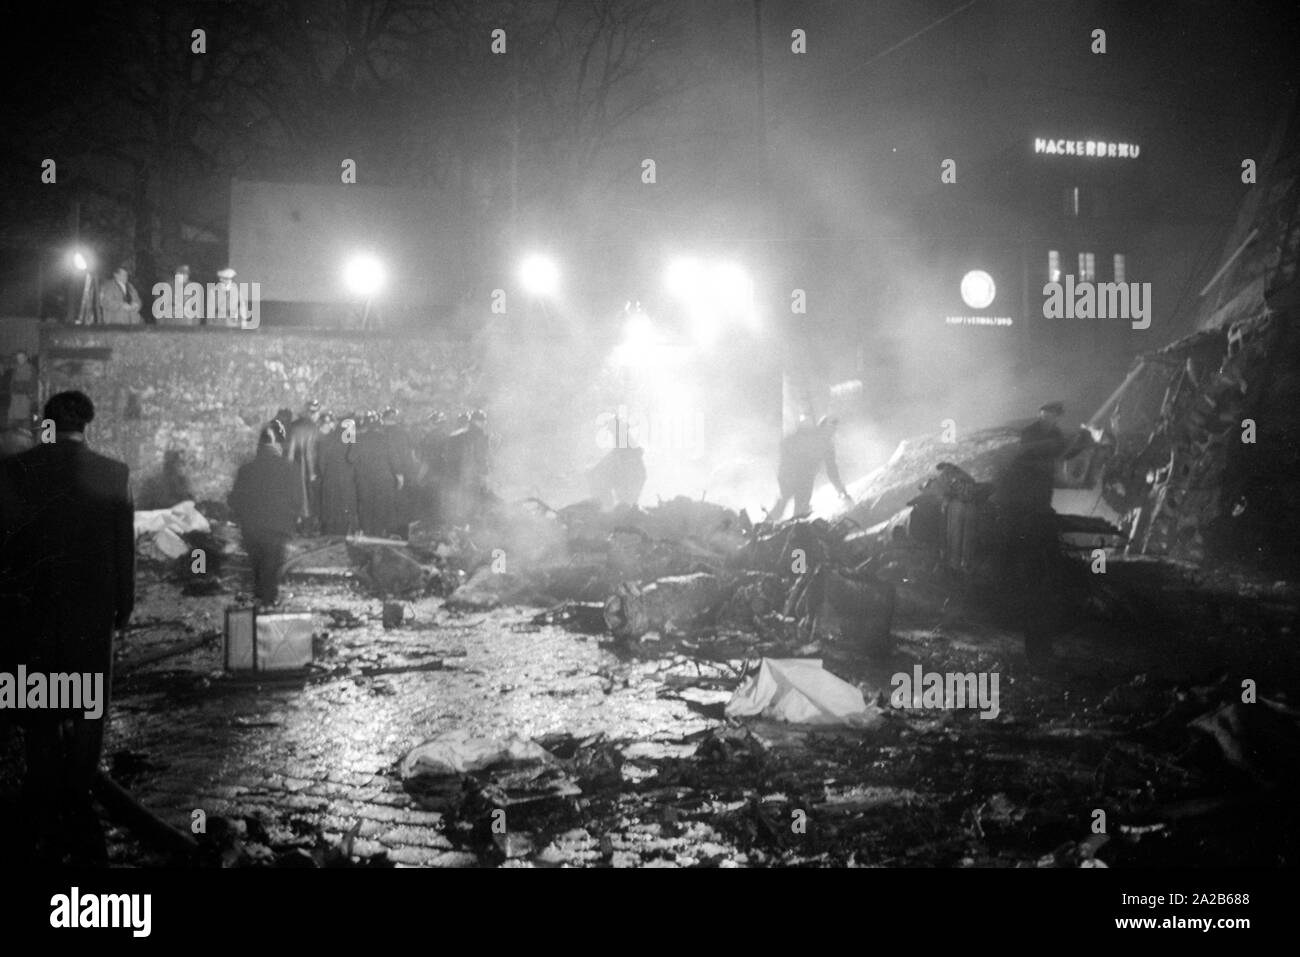 Shortly after the take off from the Munich-Riem Airport a US Air Force transport aircraft of the type Convair C-131-D Samaritan crashed in the area of Bayerstrasse / Martin-Greif Strasse on a tram. 52 people were killed. The picture shows the crash site illuminated with headlights, sightseers, relief forces and wreckage. In the background, the Hackerhaus. Stock Photo